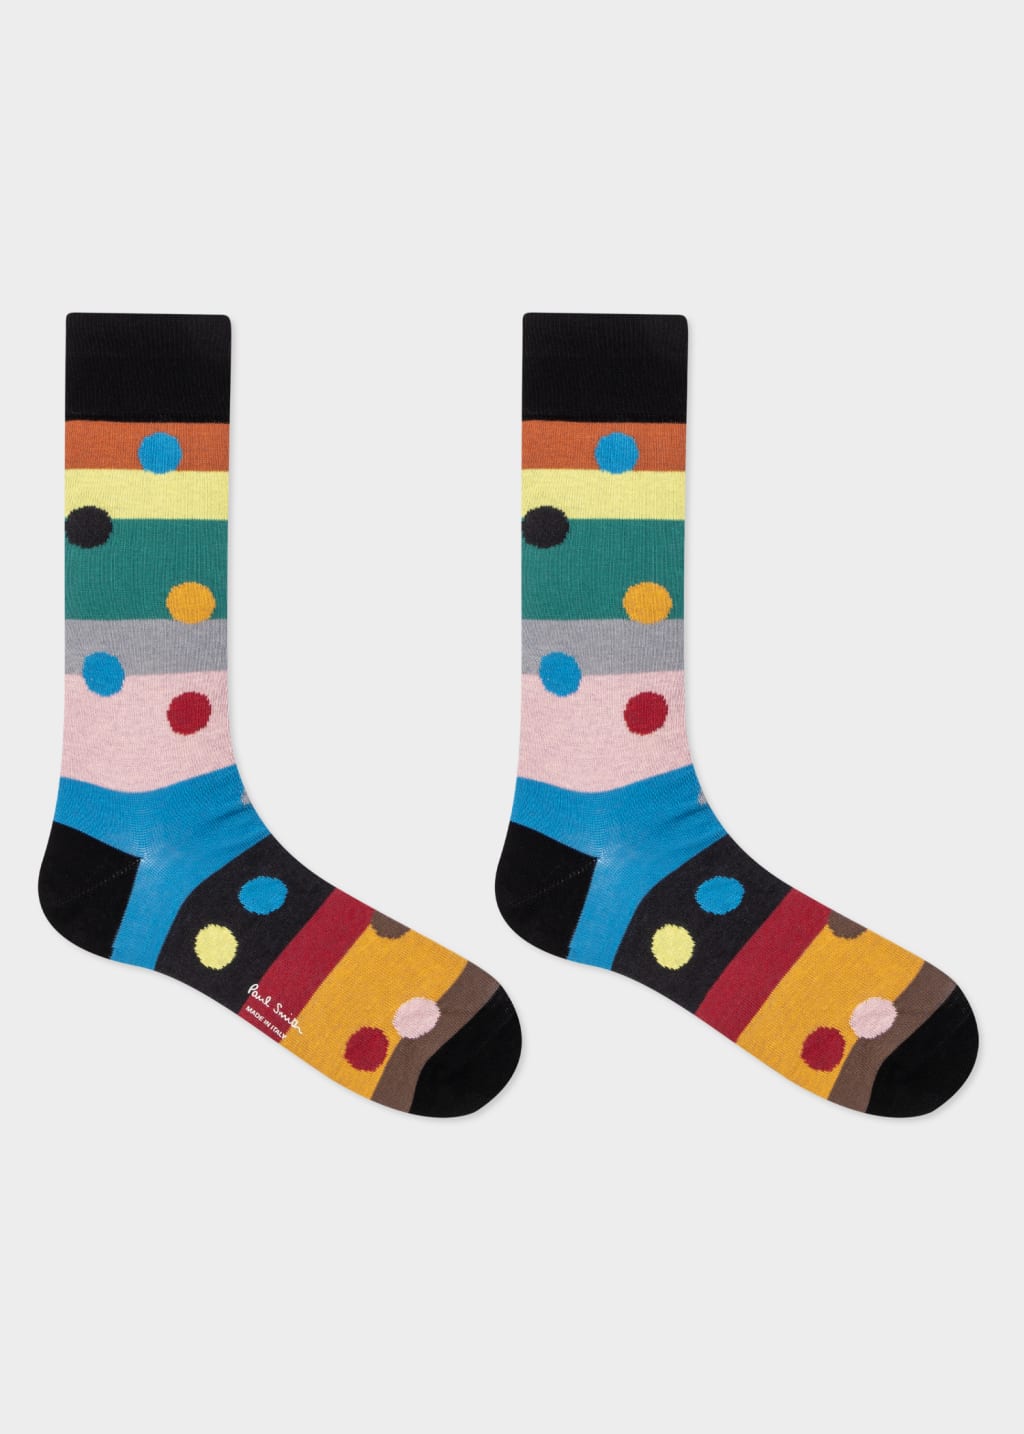 Pair View - Stripe And Spot Socks Three Pack Paul Smith